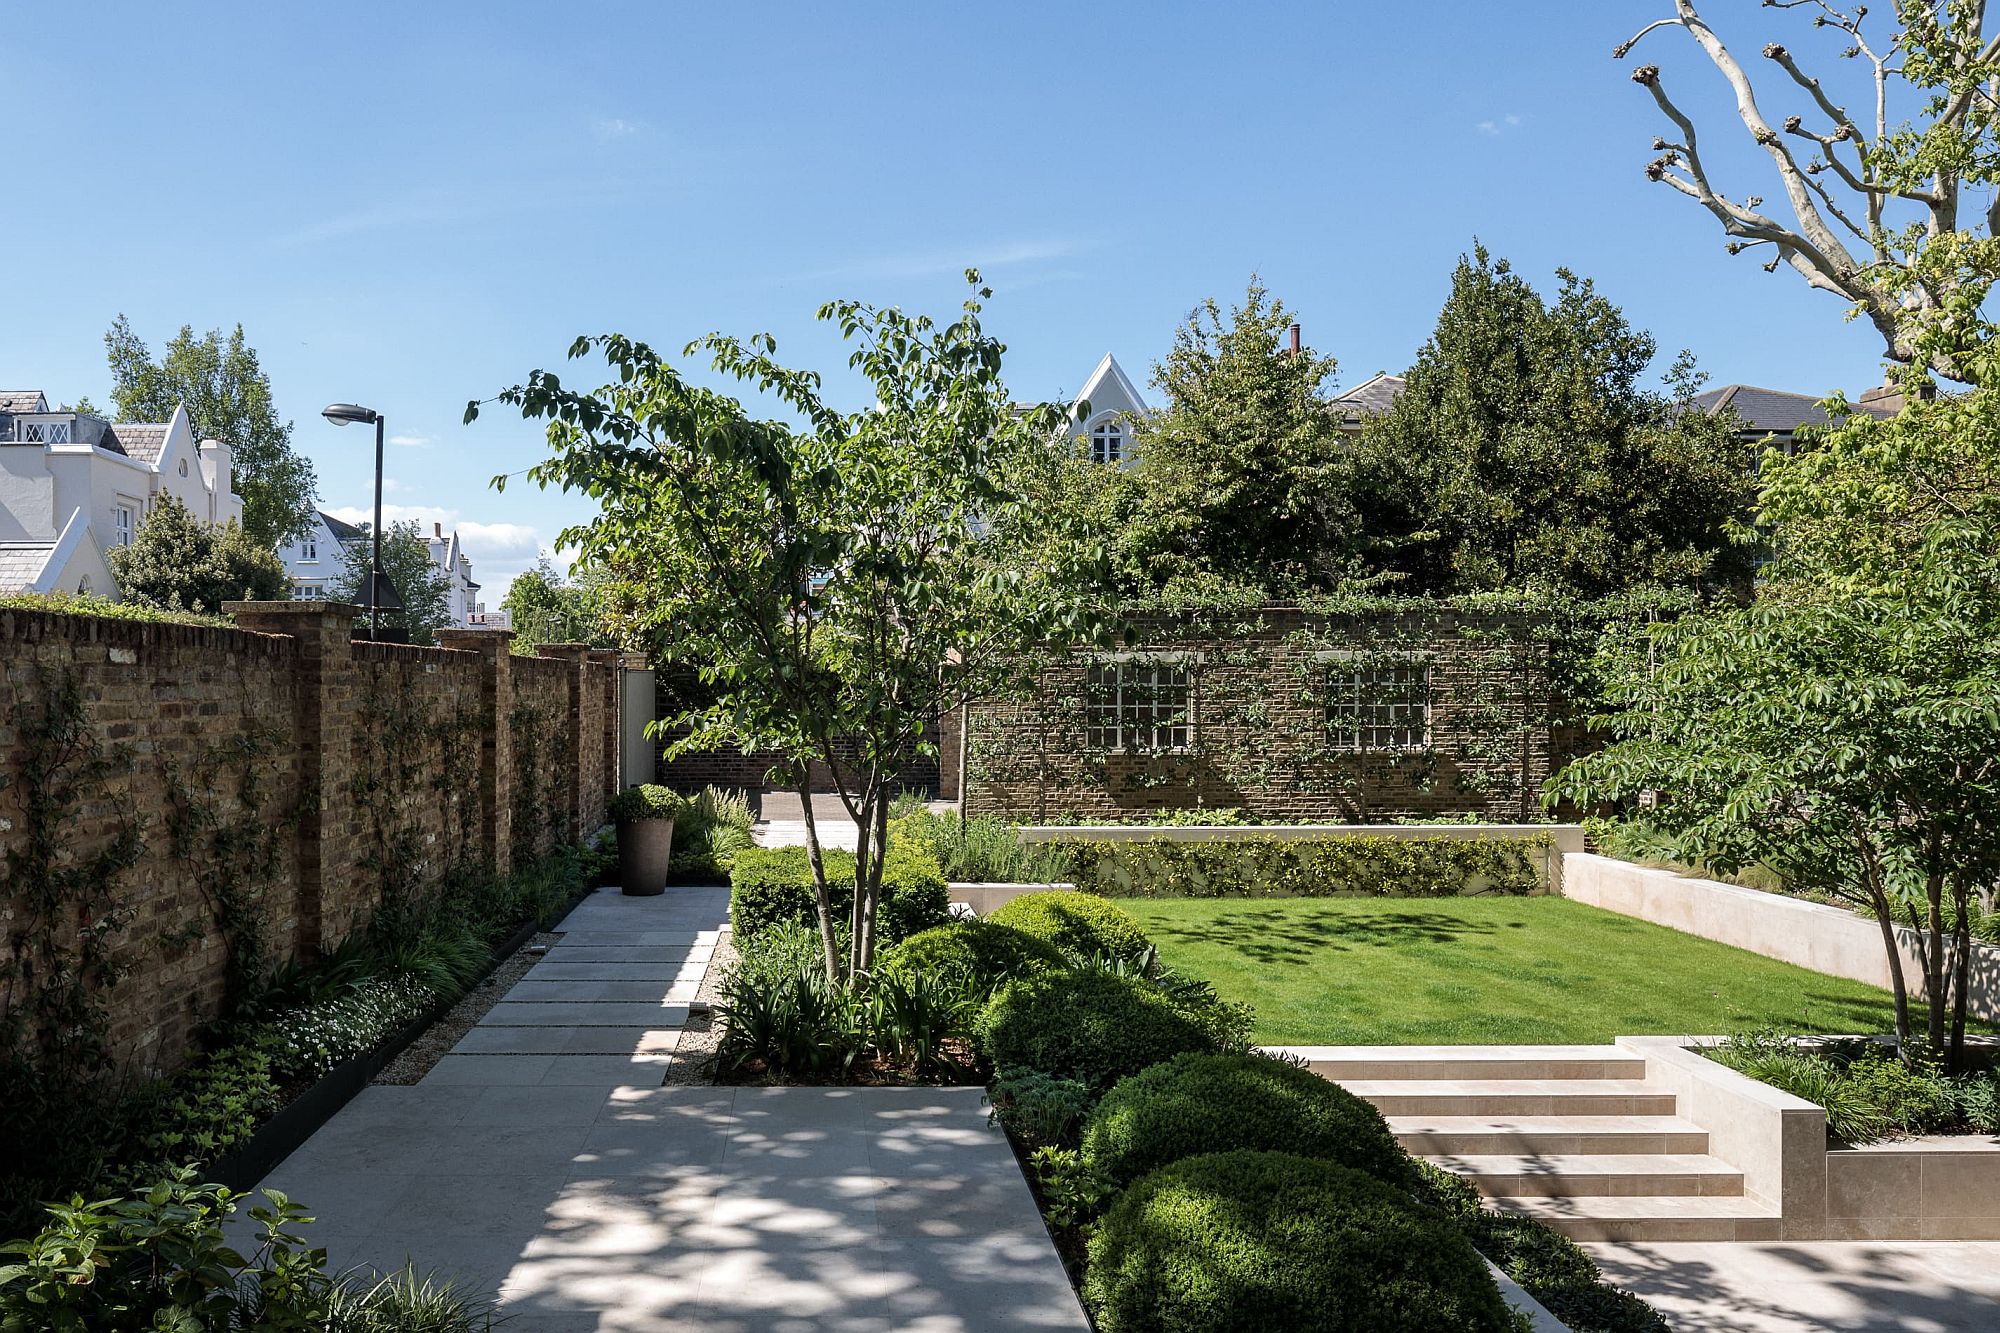 Multi-level gardens with a curated landscape add to the appeal of the house